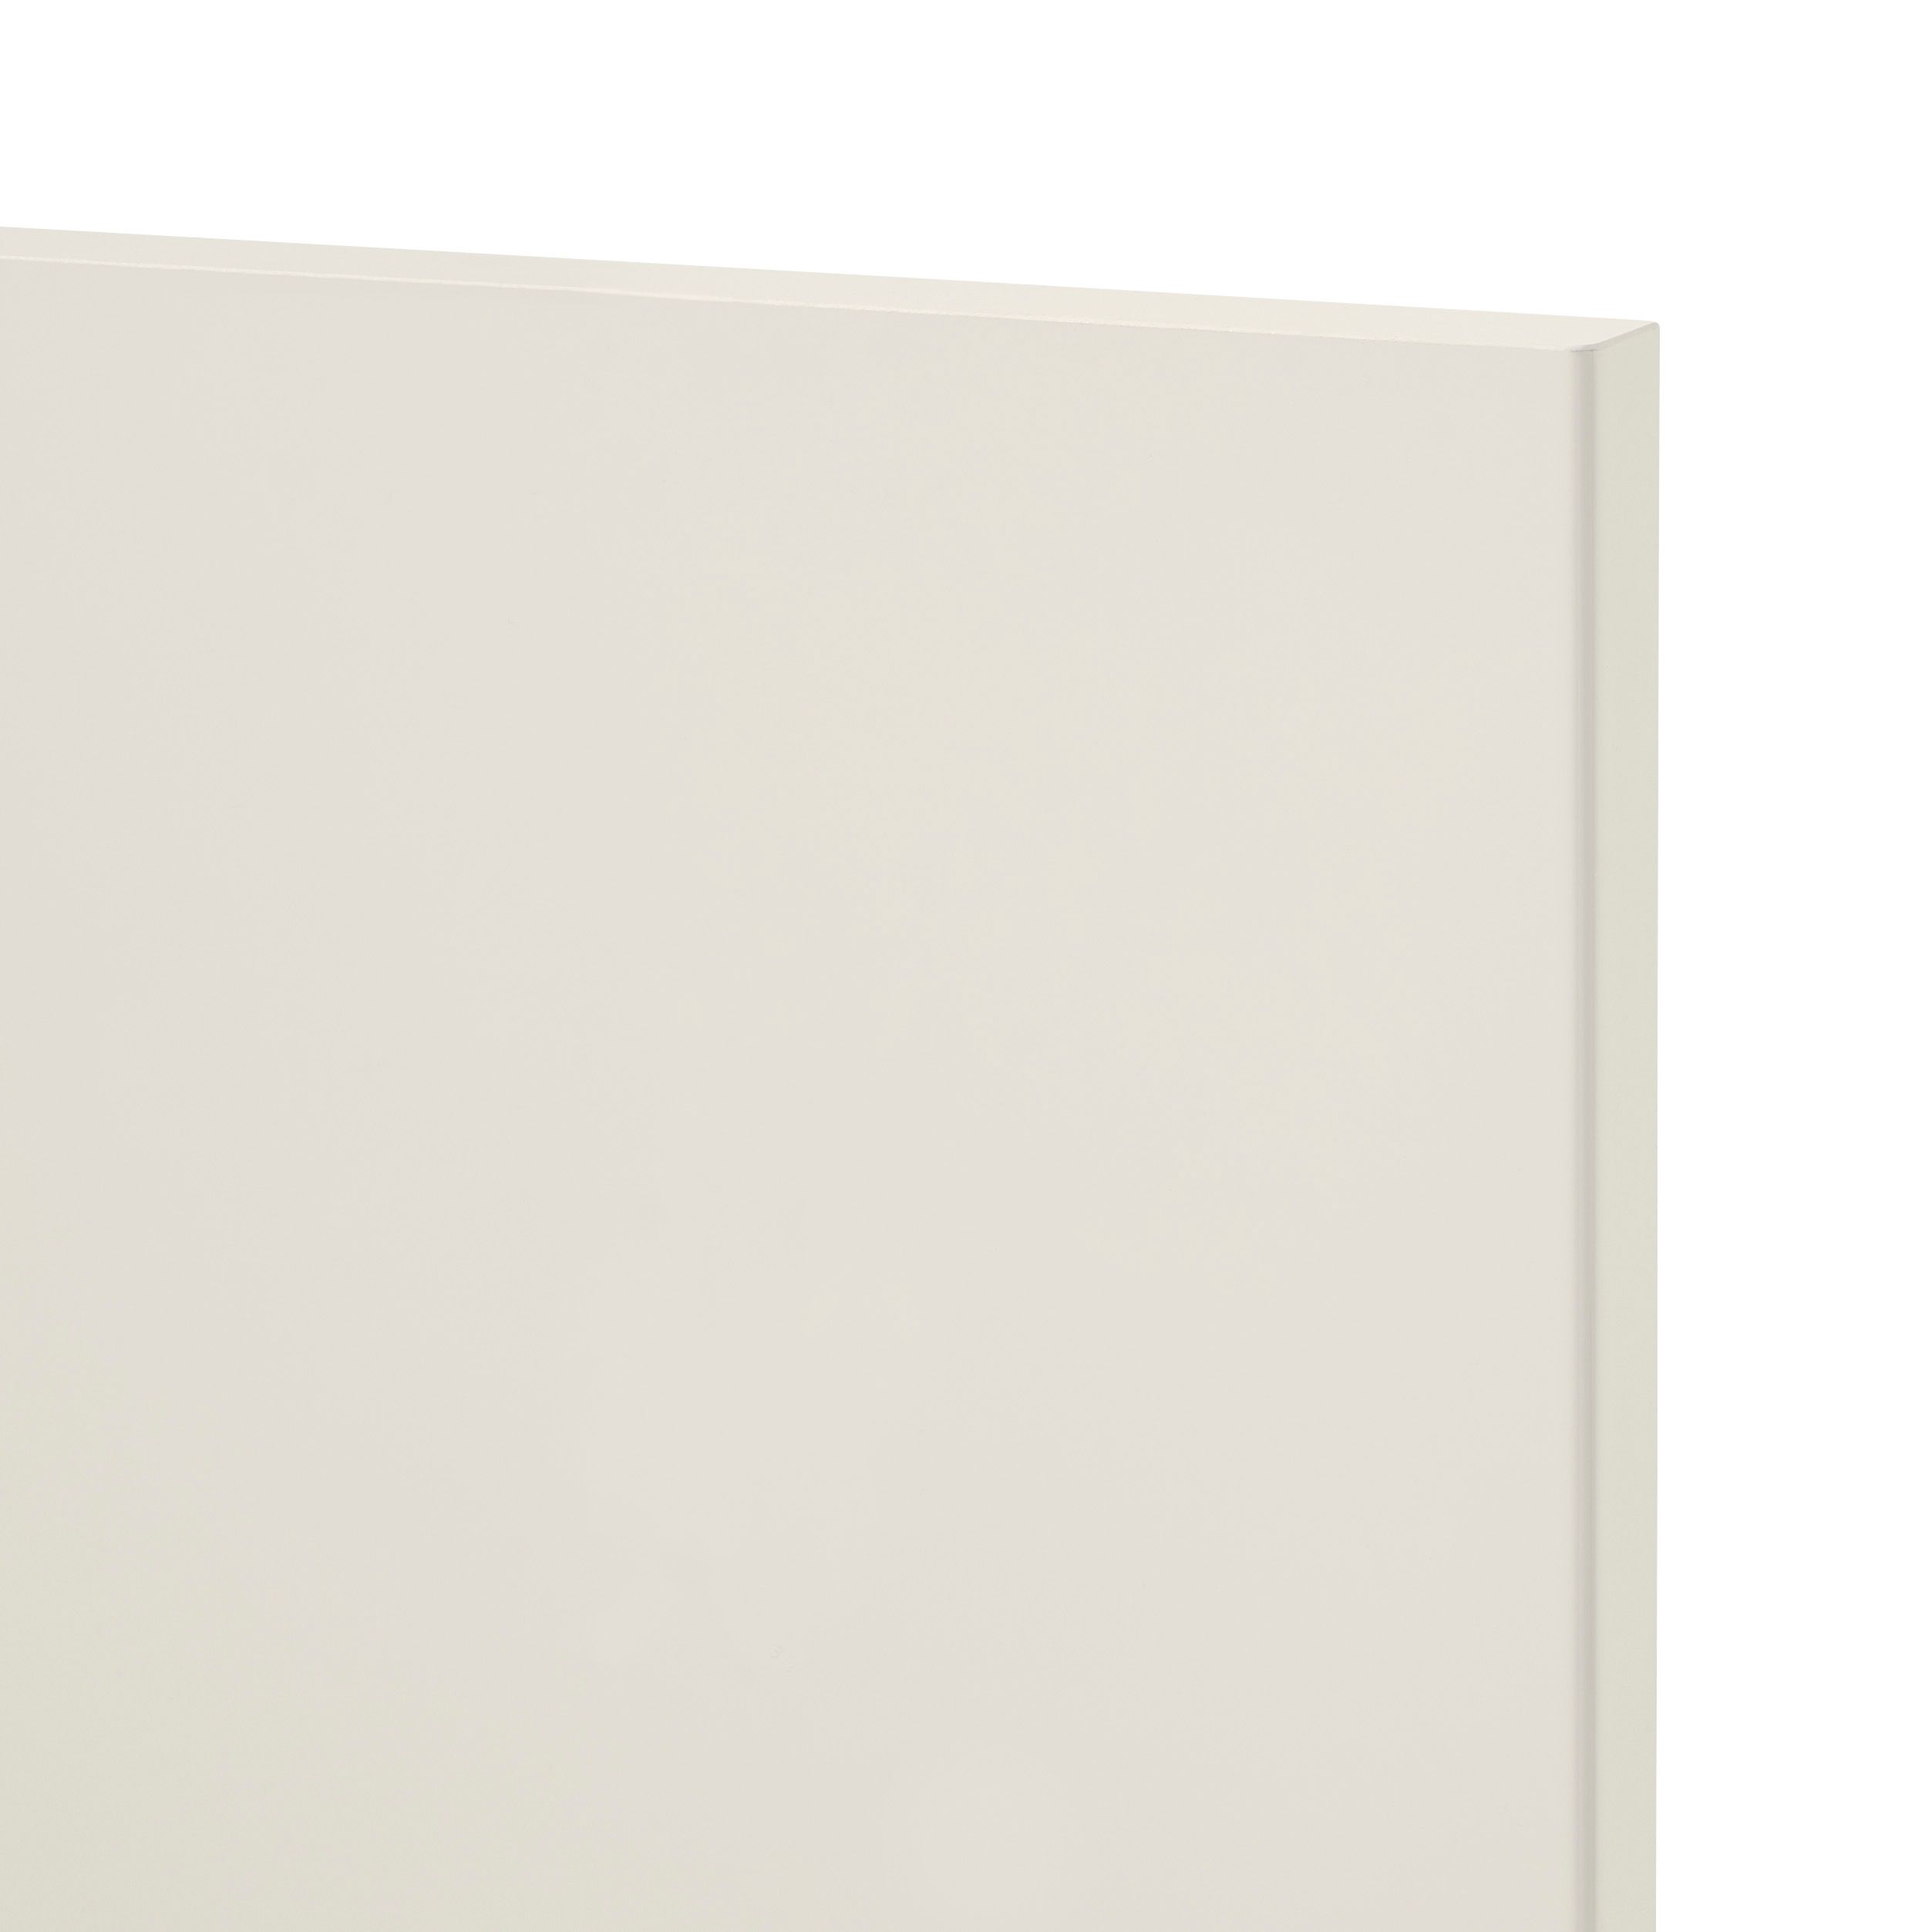 GoodHome Stevia Gloss cream slab Drawer front (W)500mm, Pack of 4